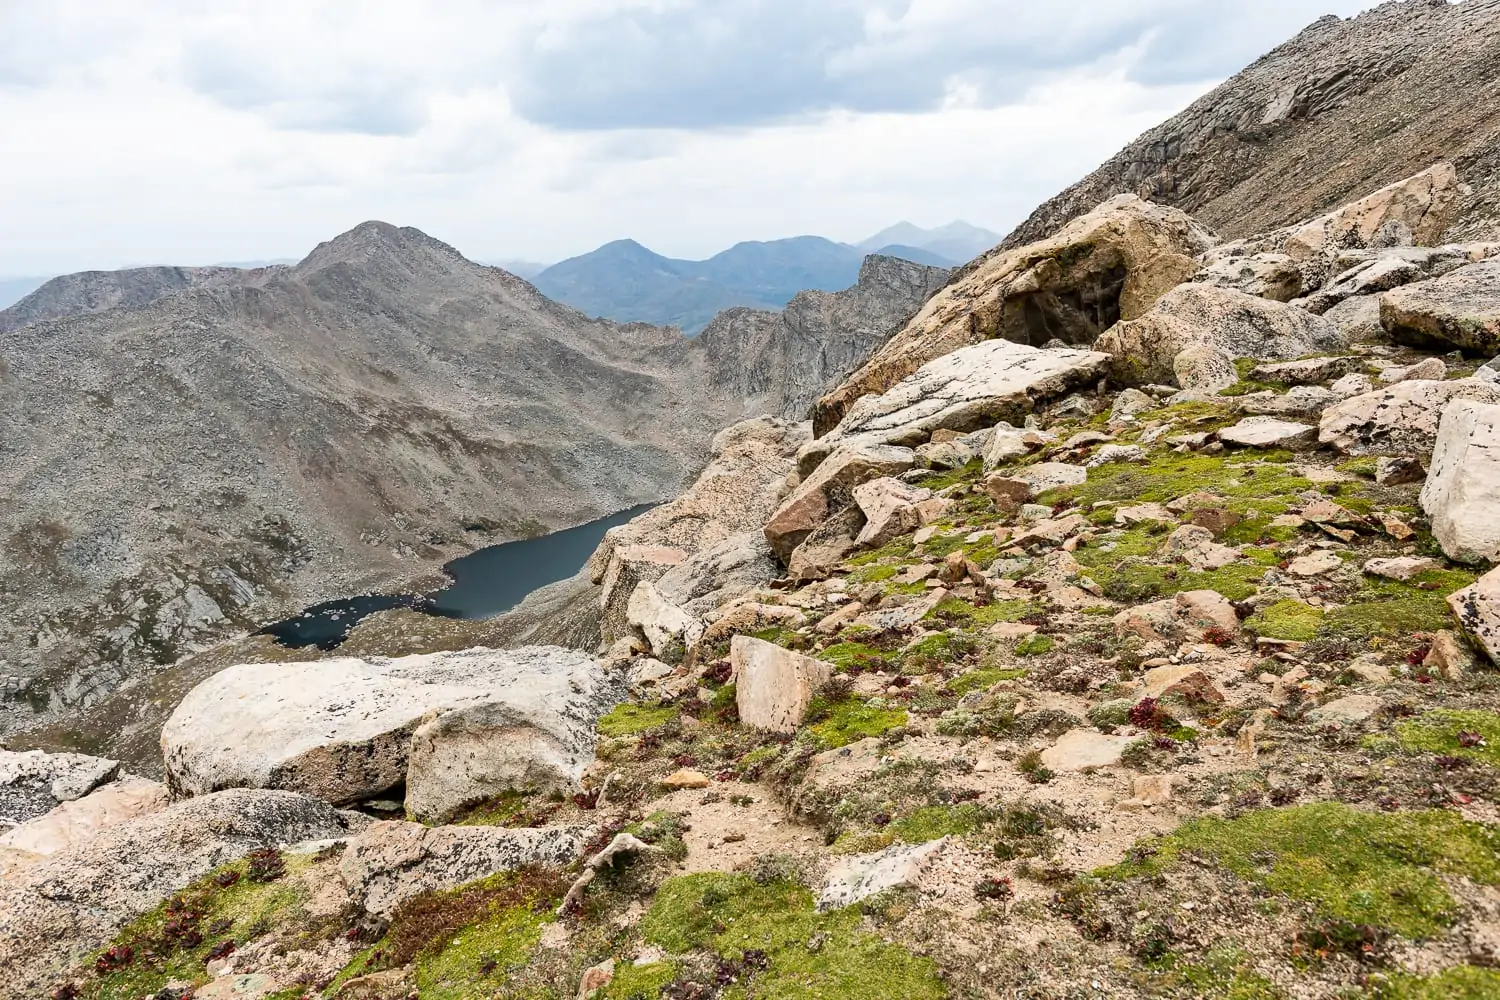 A stunning view of Mount Evans, with green vegetation, sand-colored rocks, blue water and bright sky, as one of the locations you can elope guided by Lucy Schultz Photography.